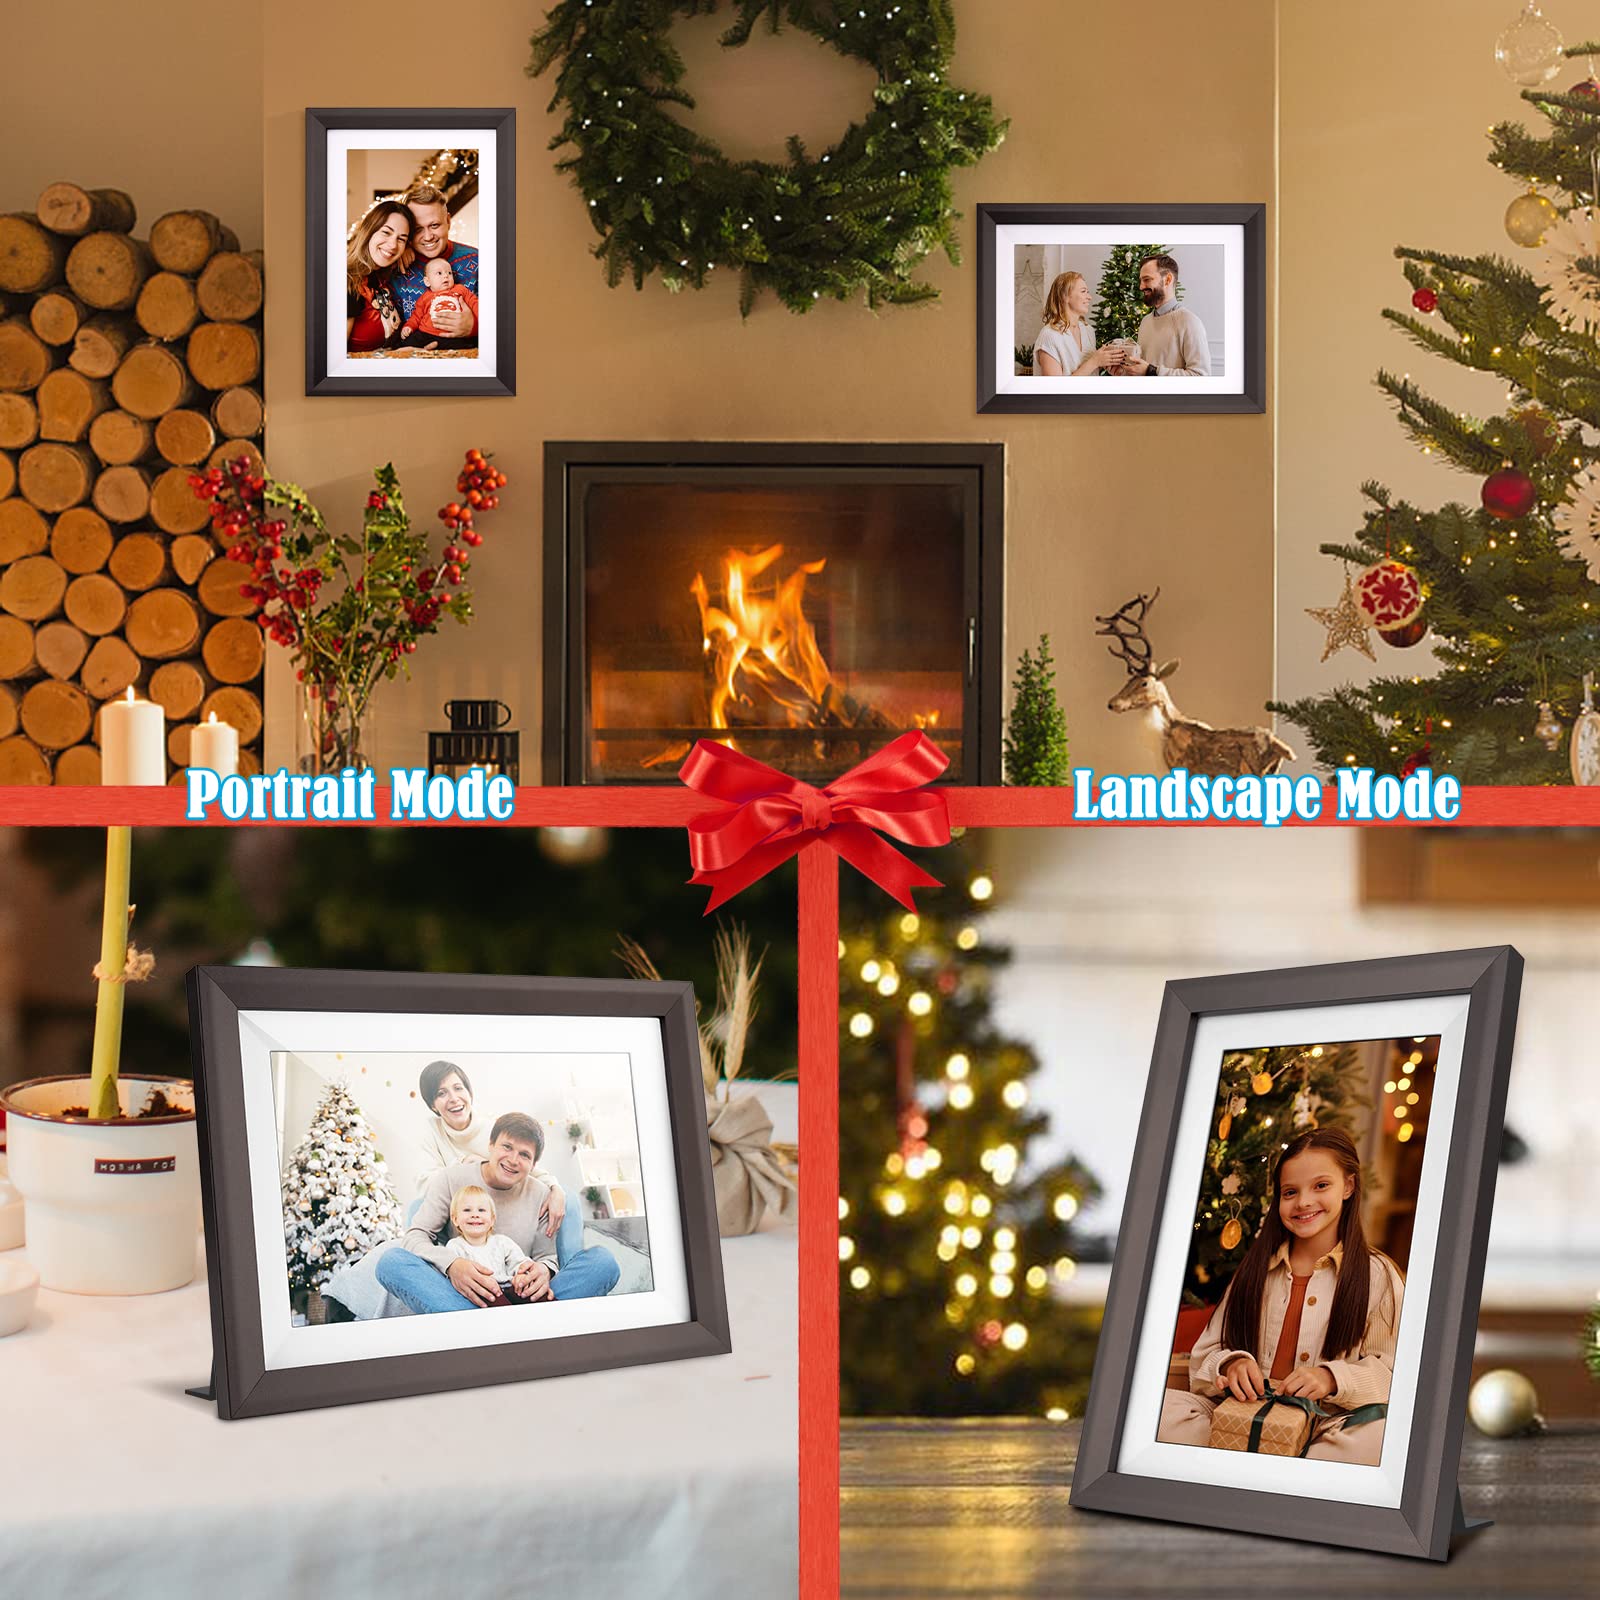 WiFi Digital Picture Frame 10.1 Inch Smart Digital Photo Frame with IPS Touch Screen HD Display, 16GB Storage Easy Setup to Share Photos or Videos Anywhere via Free Frameo APP (10.1 Inch Frame 3#)